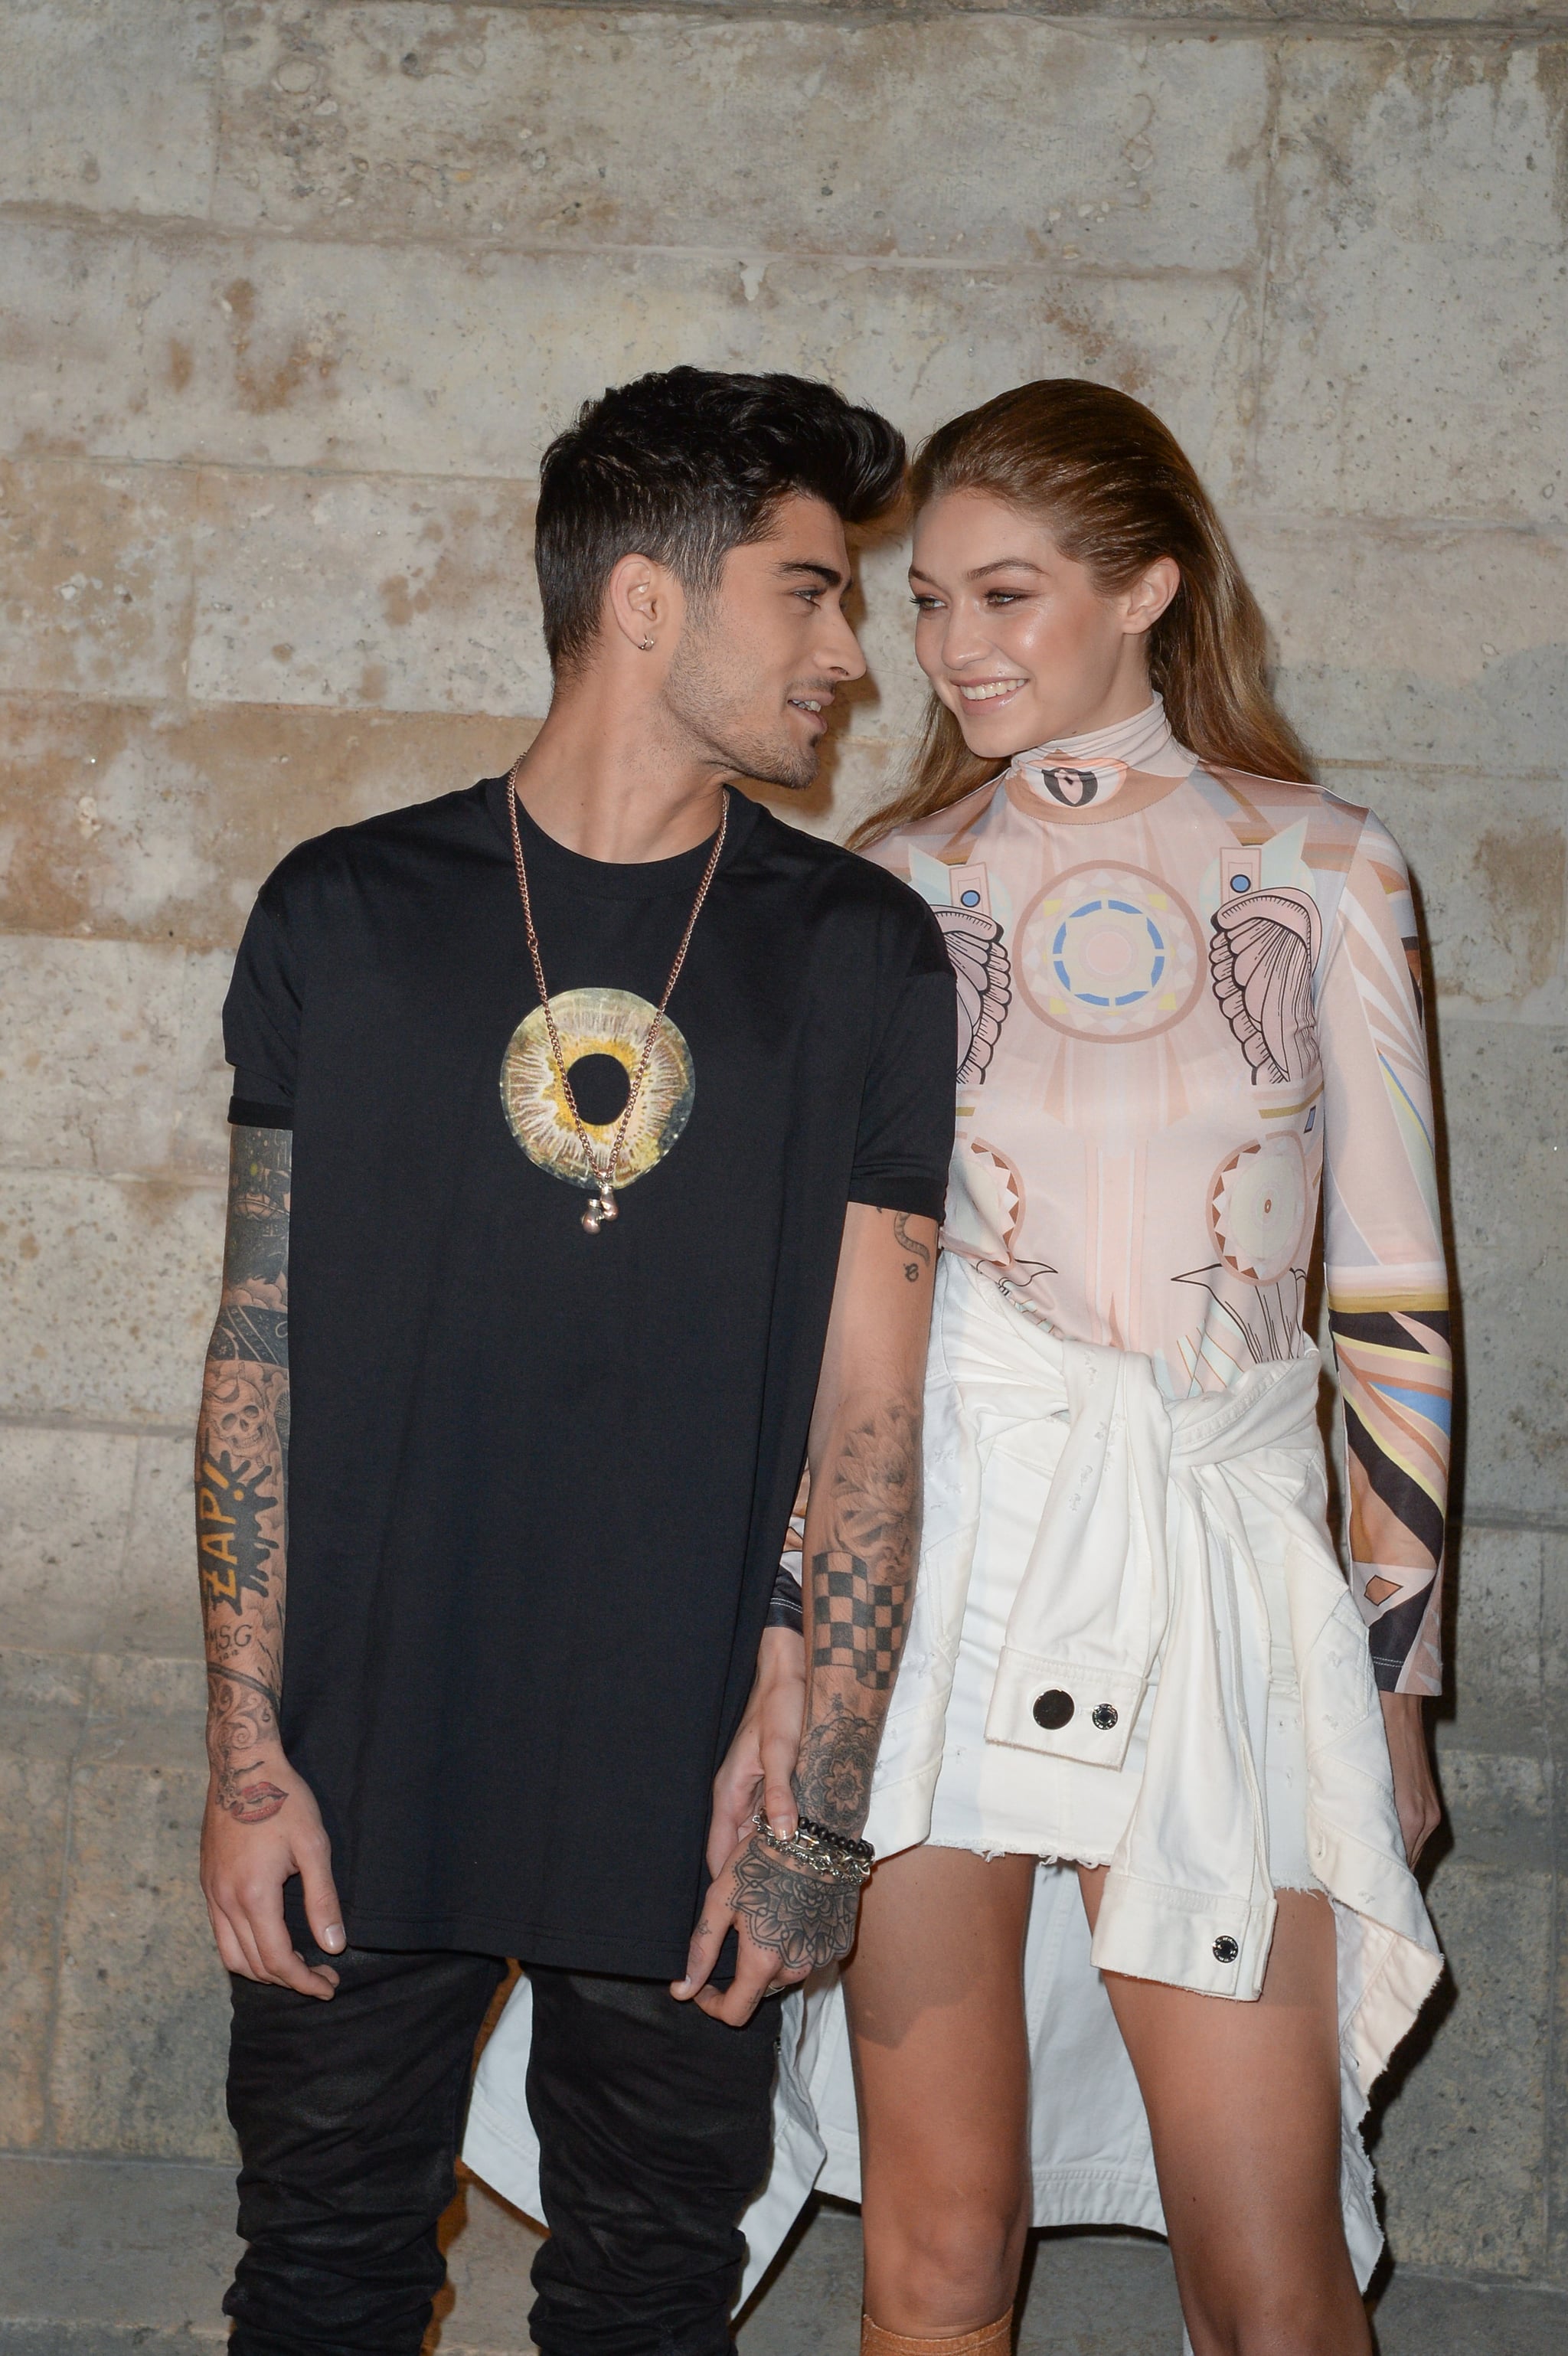 PARIS, FRANCE - OCTOBER 02:  Zayn Malik and Gigi Hadid attend the  Givenchy show as part of the Paris Fashion Week Womenswear Spring/Summer 2017on October 2, 2016 in Paris, France.  (Photo by Stephane Cardinale - Corbis/Corbis via Getty Images)